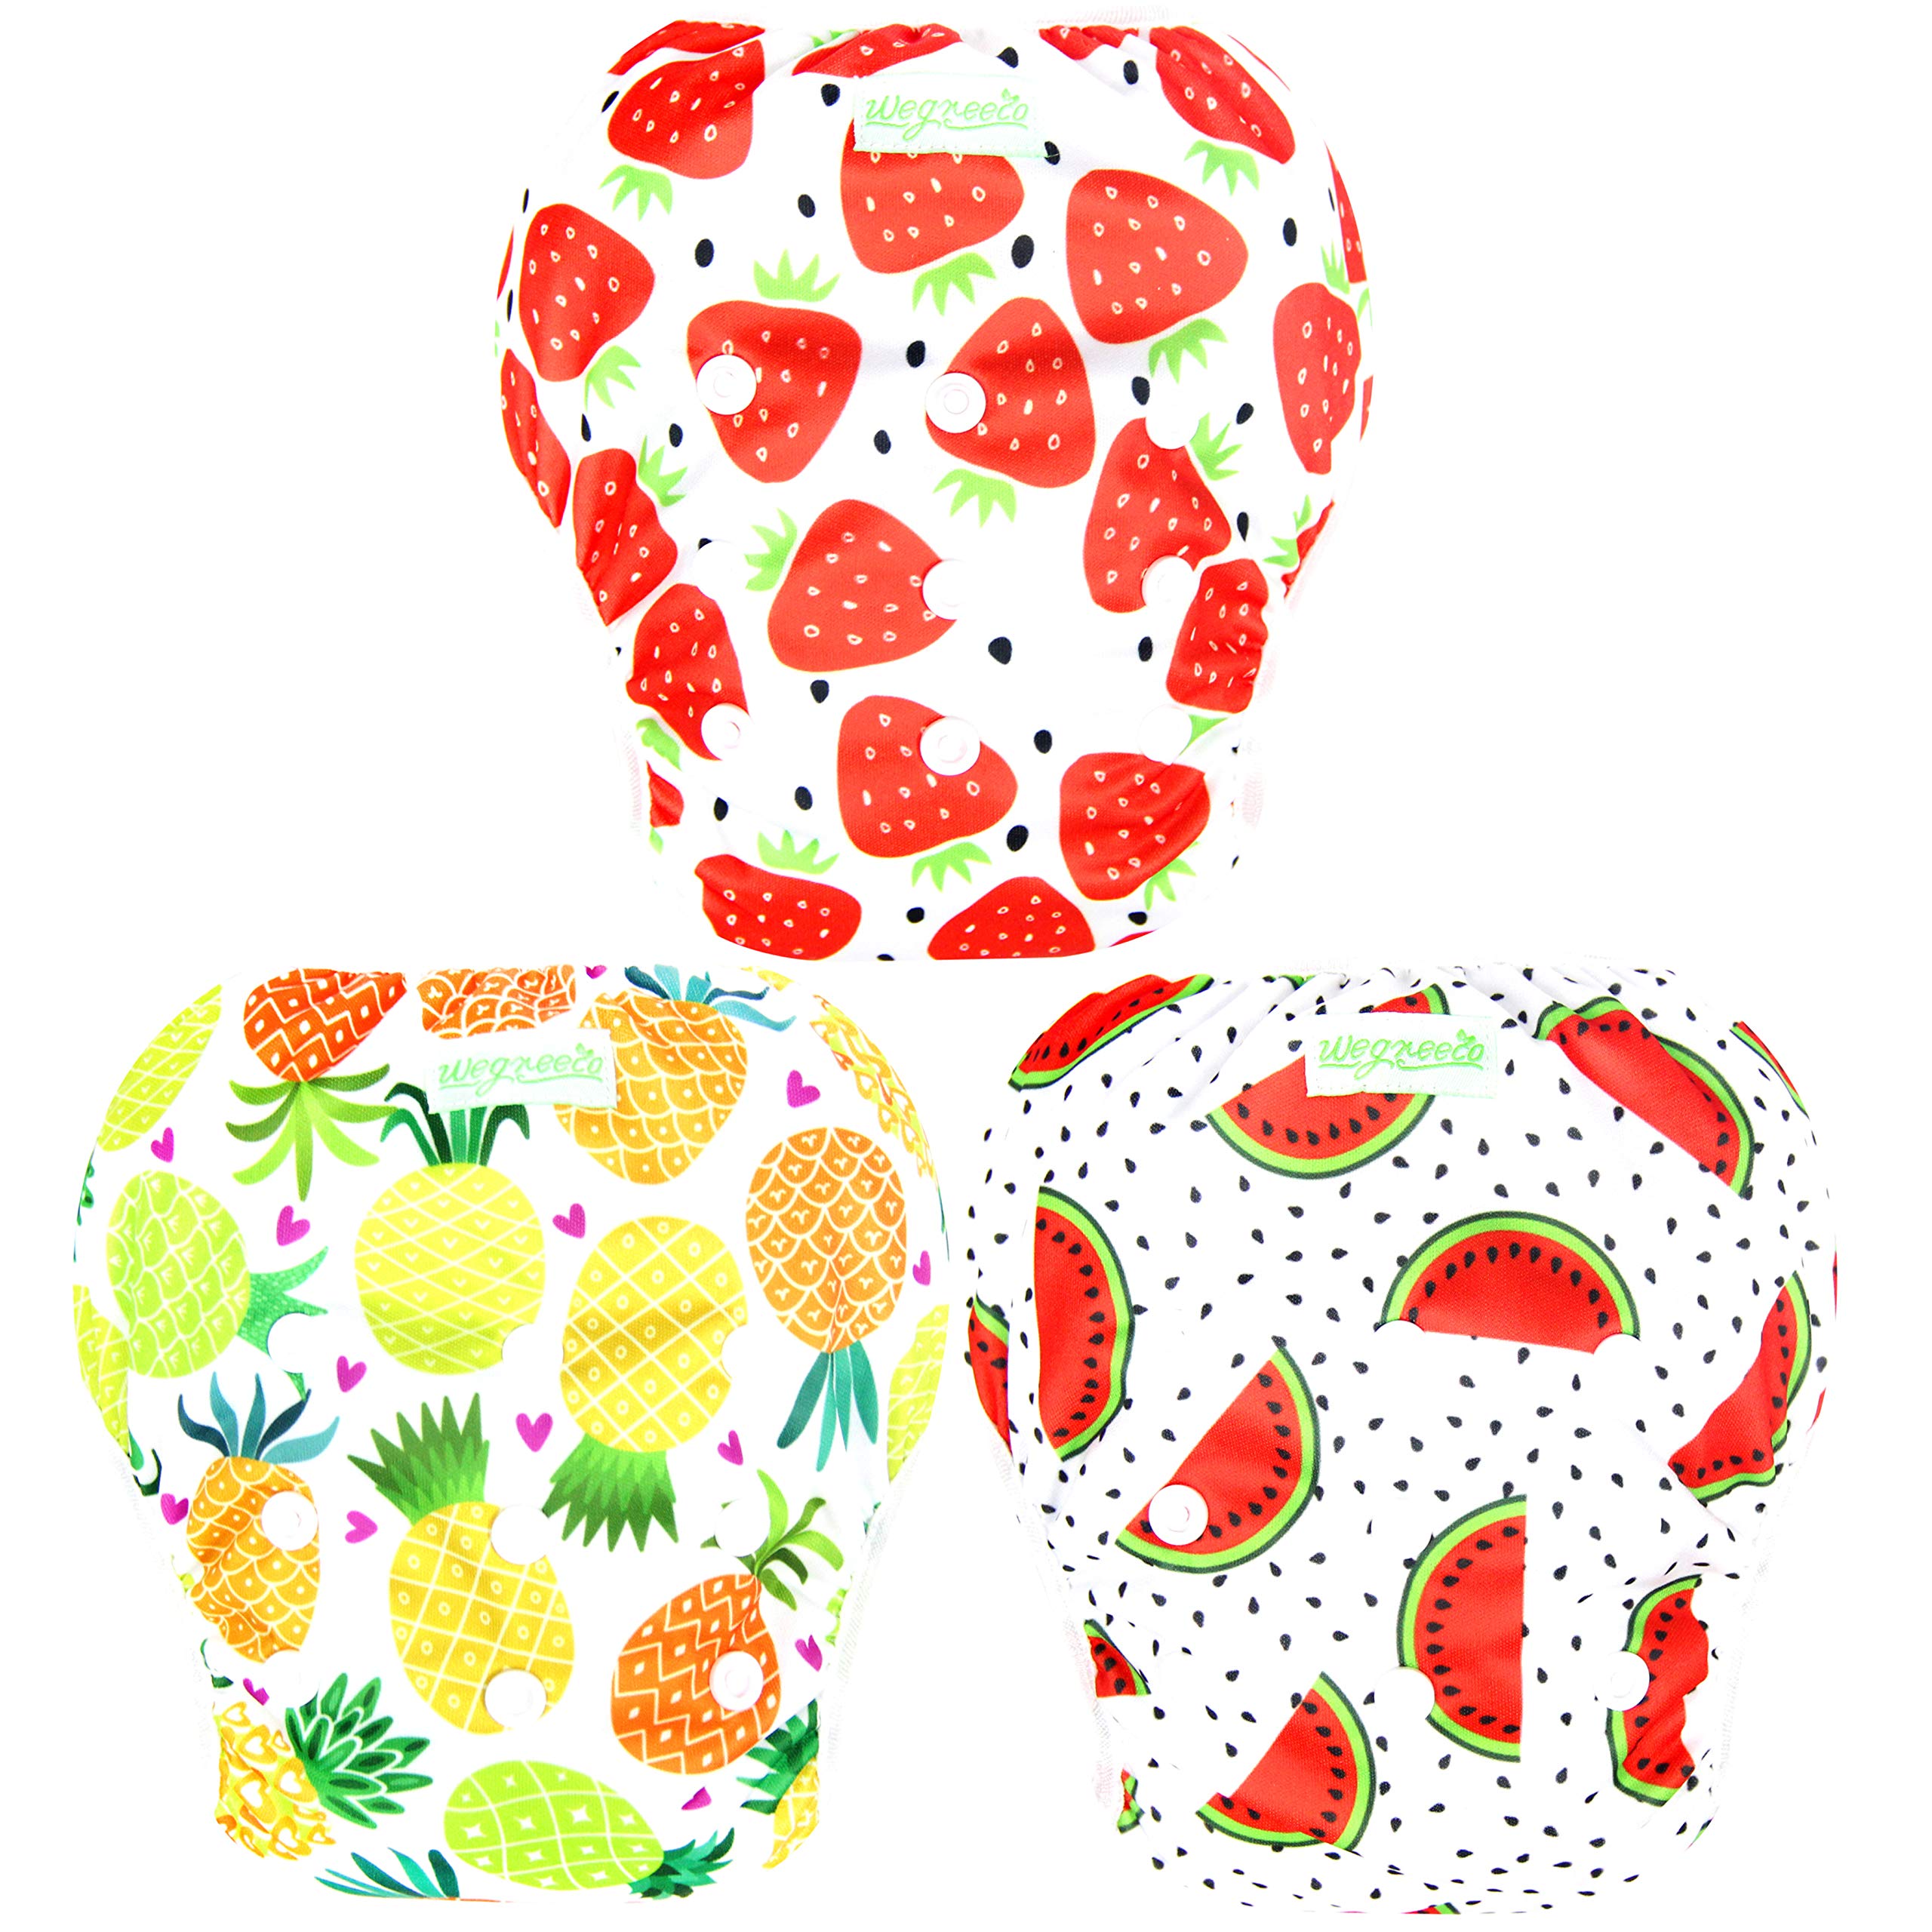 wegreeco Baby & Toddler Snap One Size Adjustable Reusable Baby Swim Diaper (Fruits, Large, 3 Pack)